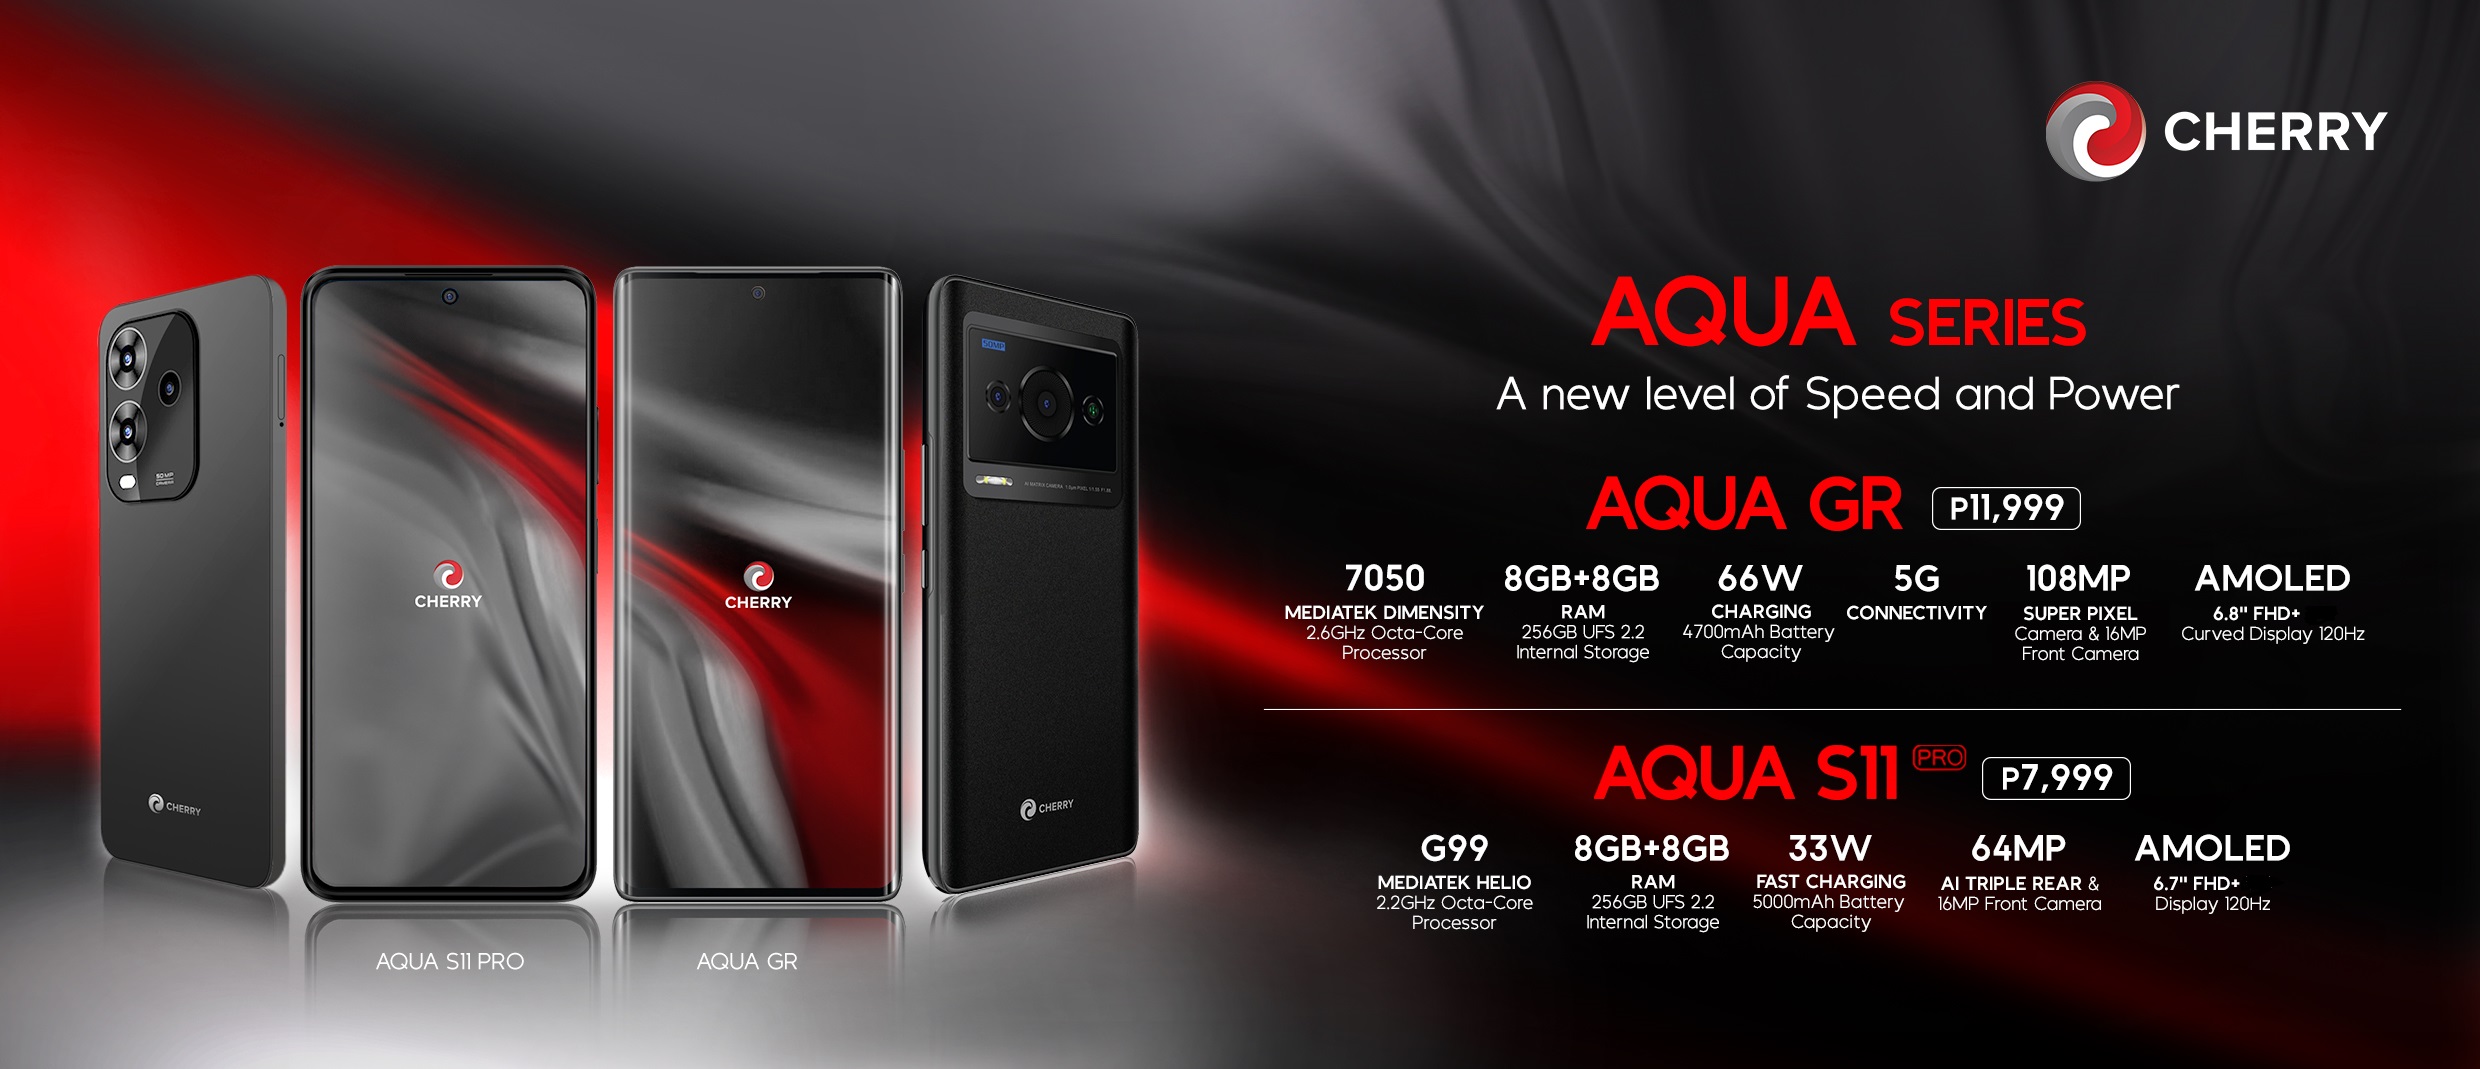 CHERRY PHILIPPINES IS RINGING IN WITH A NEW LEVEL OF SPEED AND POWER –THE AQUA SERIES